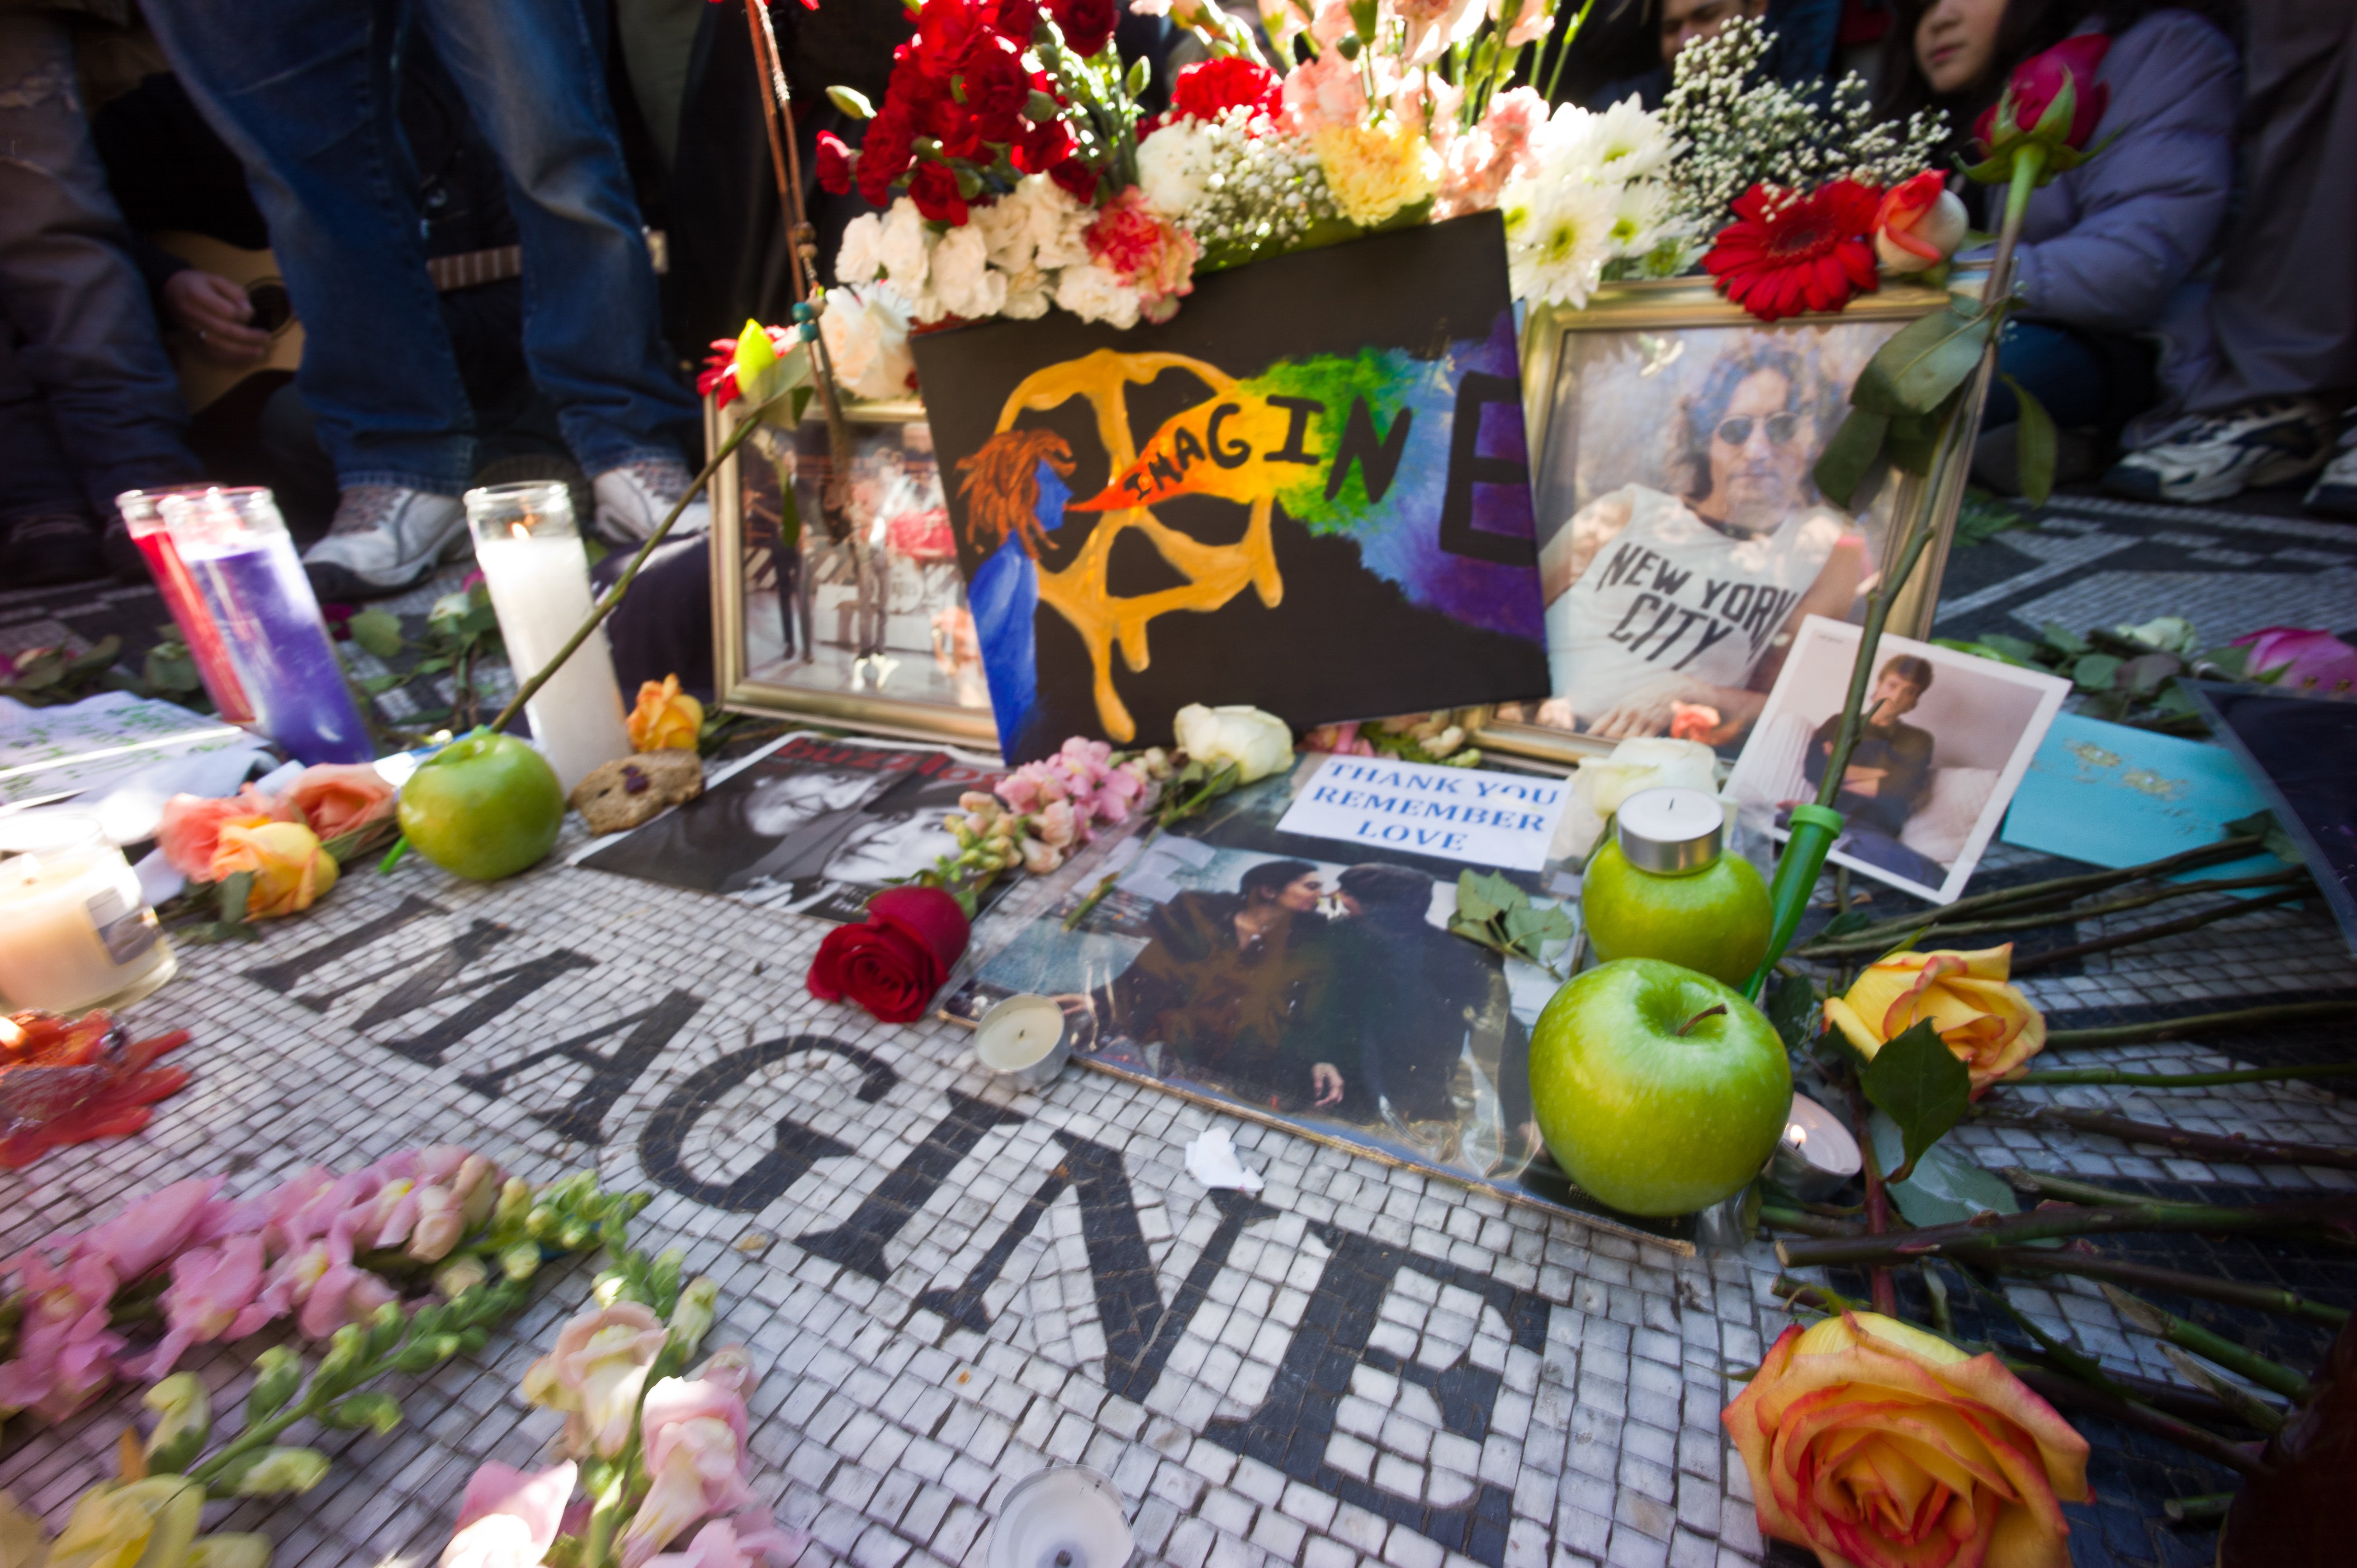 The Imagine mosaic in Strawberry Fields is the focal point for fans, media and grievers of John Lennon, shot to death 30 years ago today.